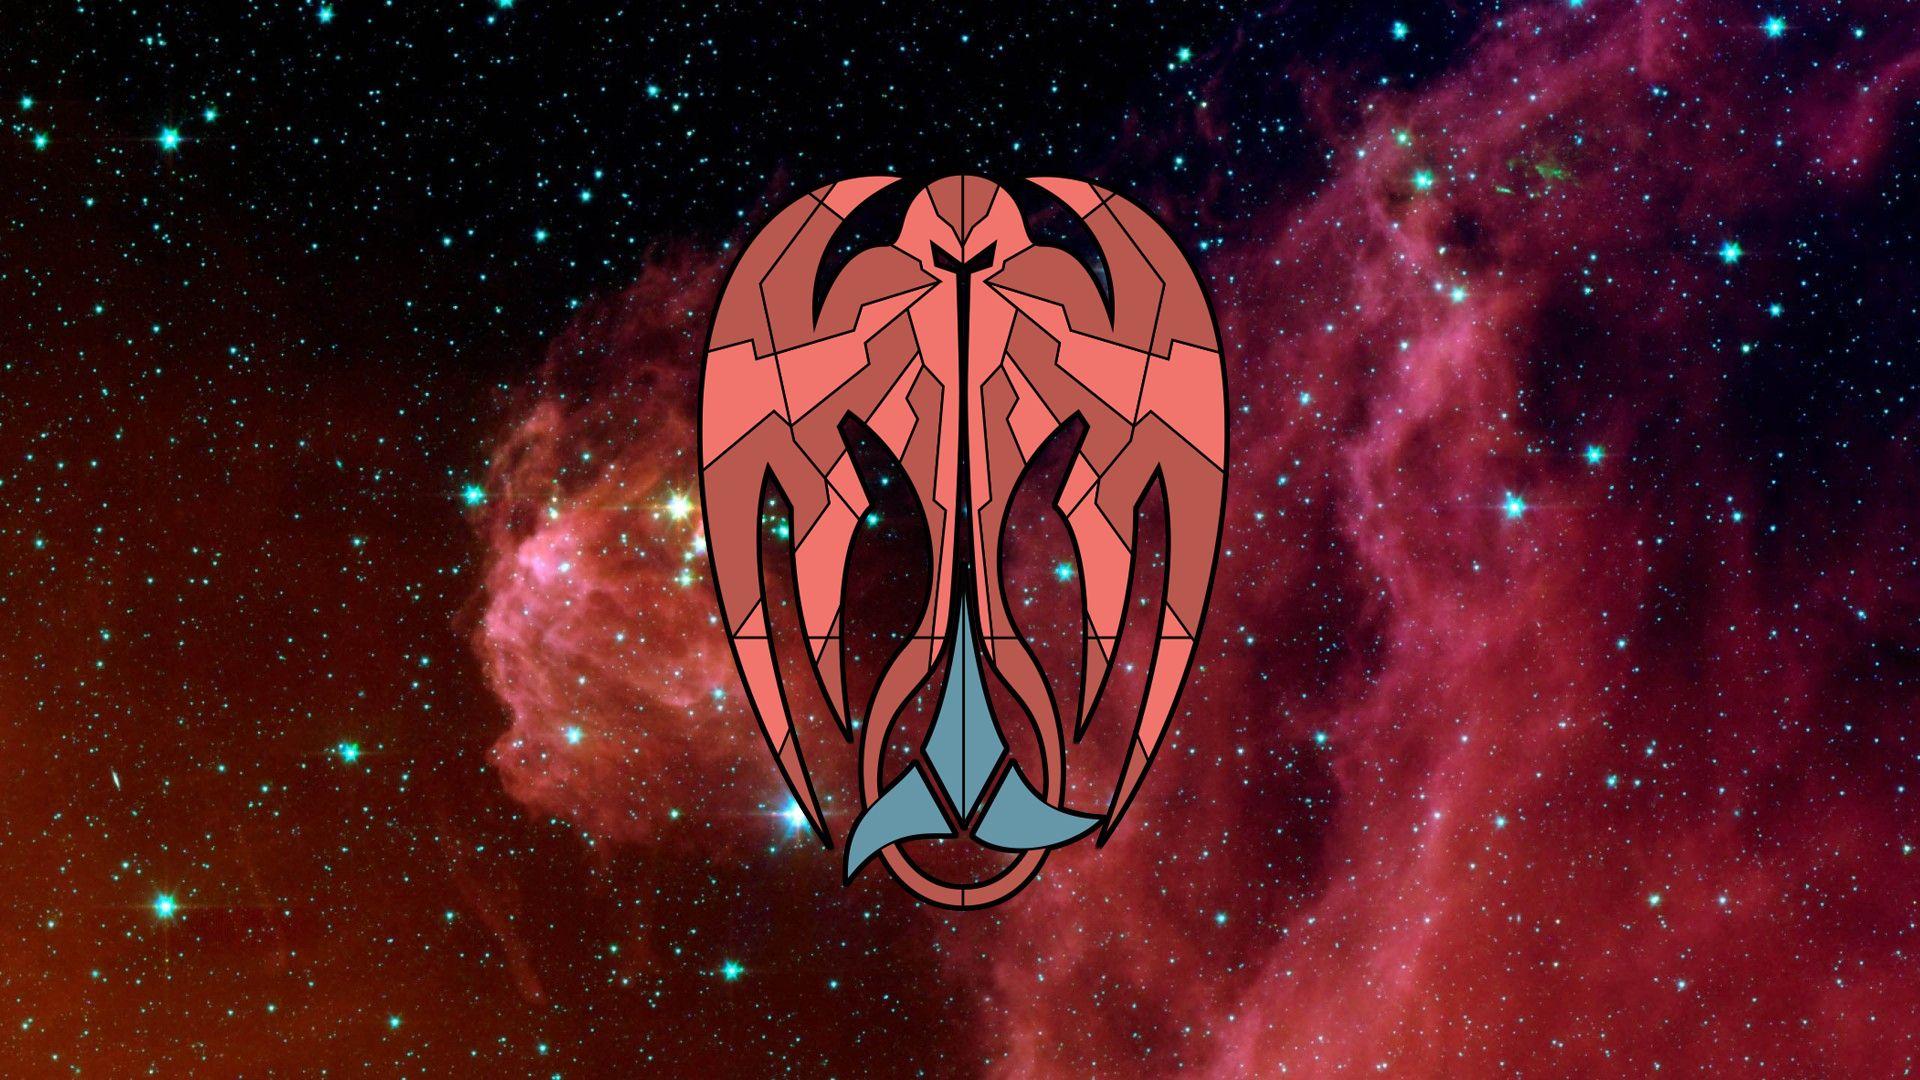 Quick And Simple Klingon Cardassian Alliance Wallpaper In 1920x1080